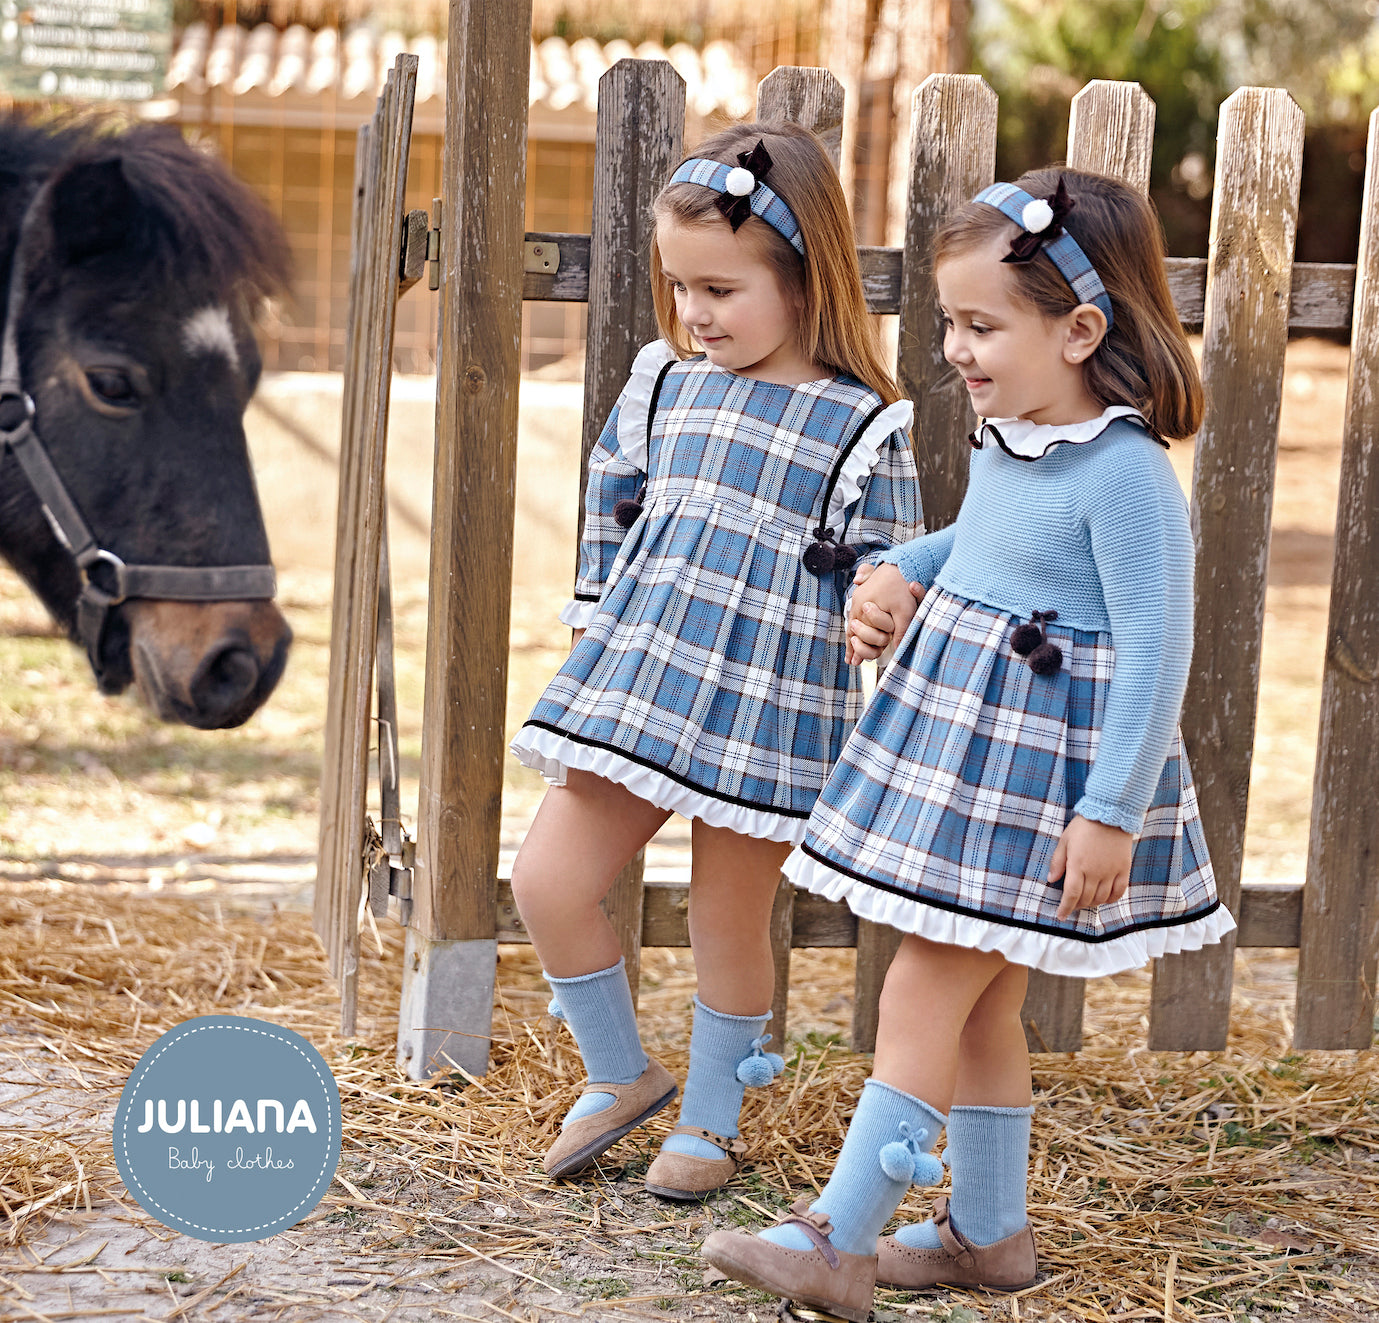 Be ready for the winter season with this stylish knitted dress for your little girl. This stunning dress comes in a turquoise colour with a checked print design, and is accompanied by a matching bonnet. It is available in sizes ranging from 3 months up to 4 years old.